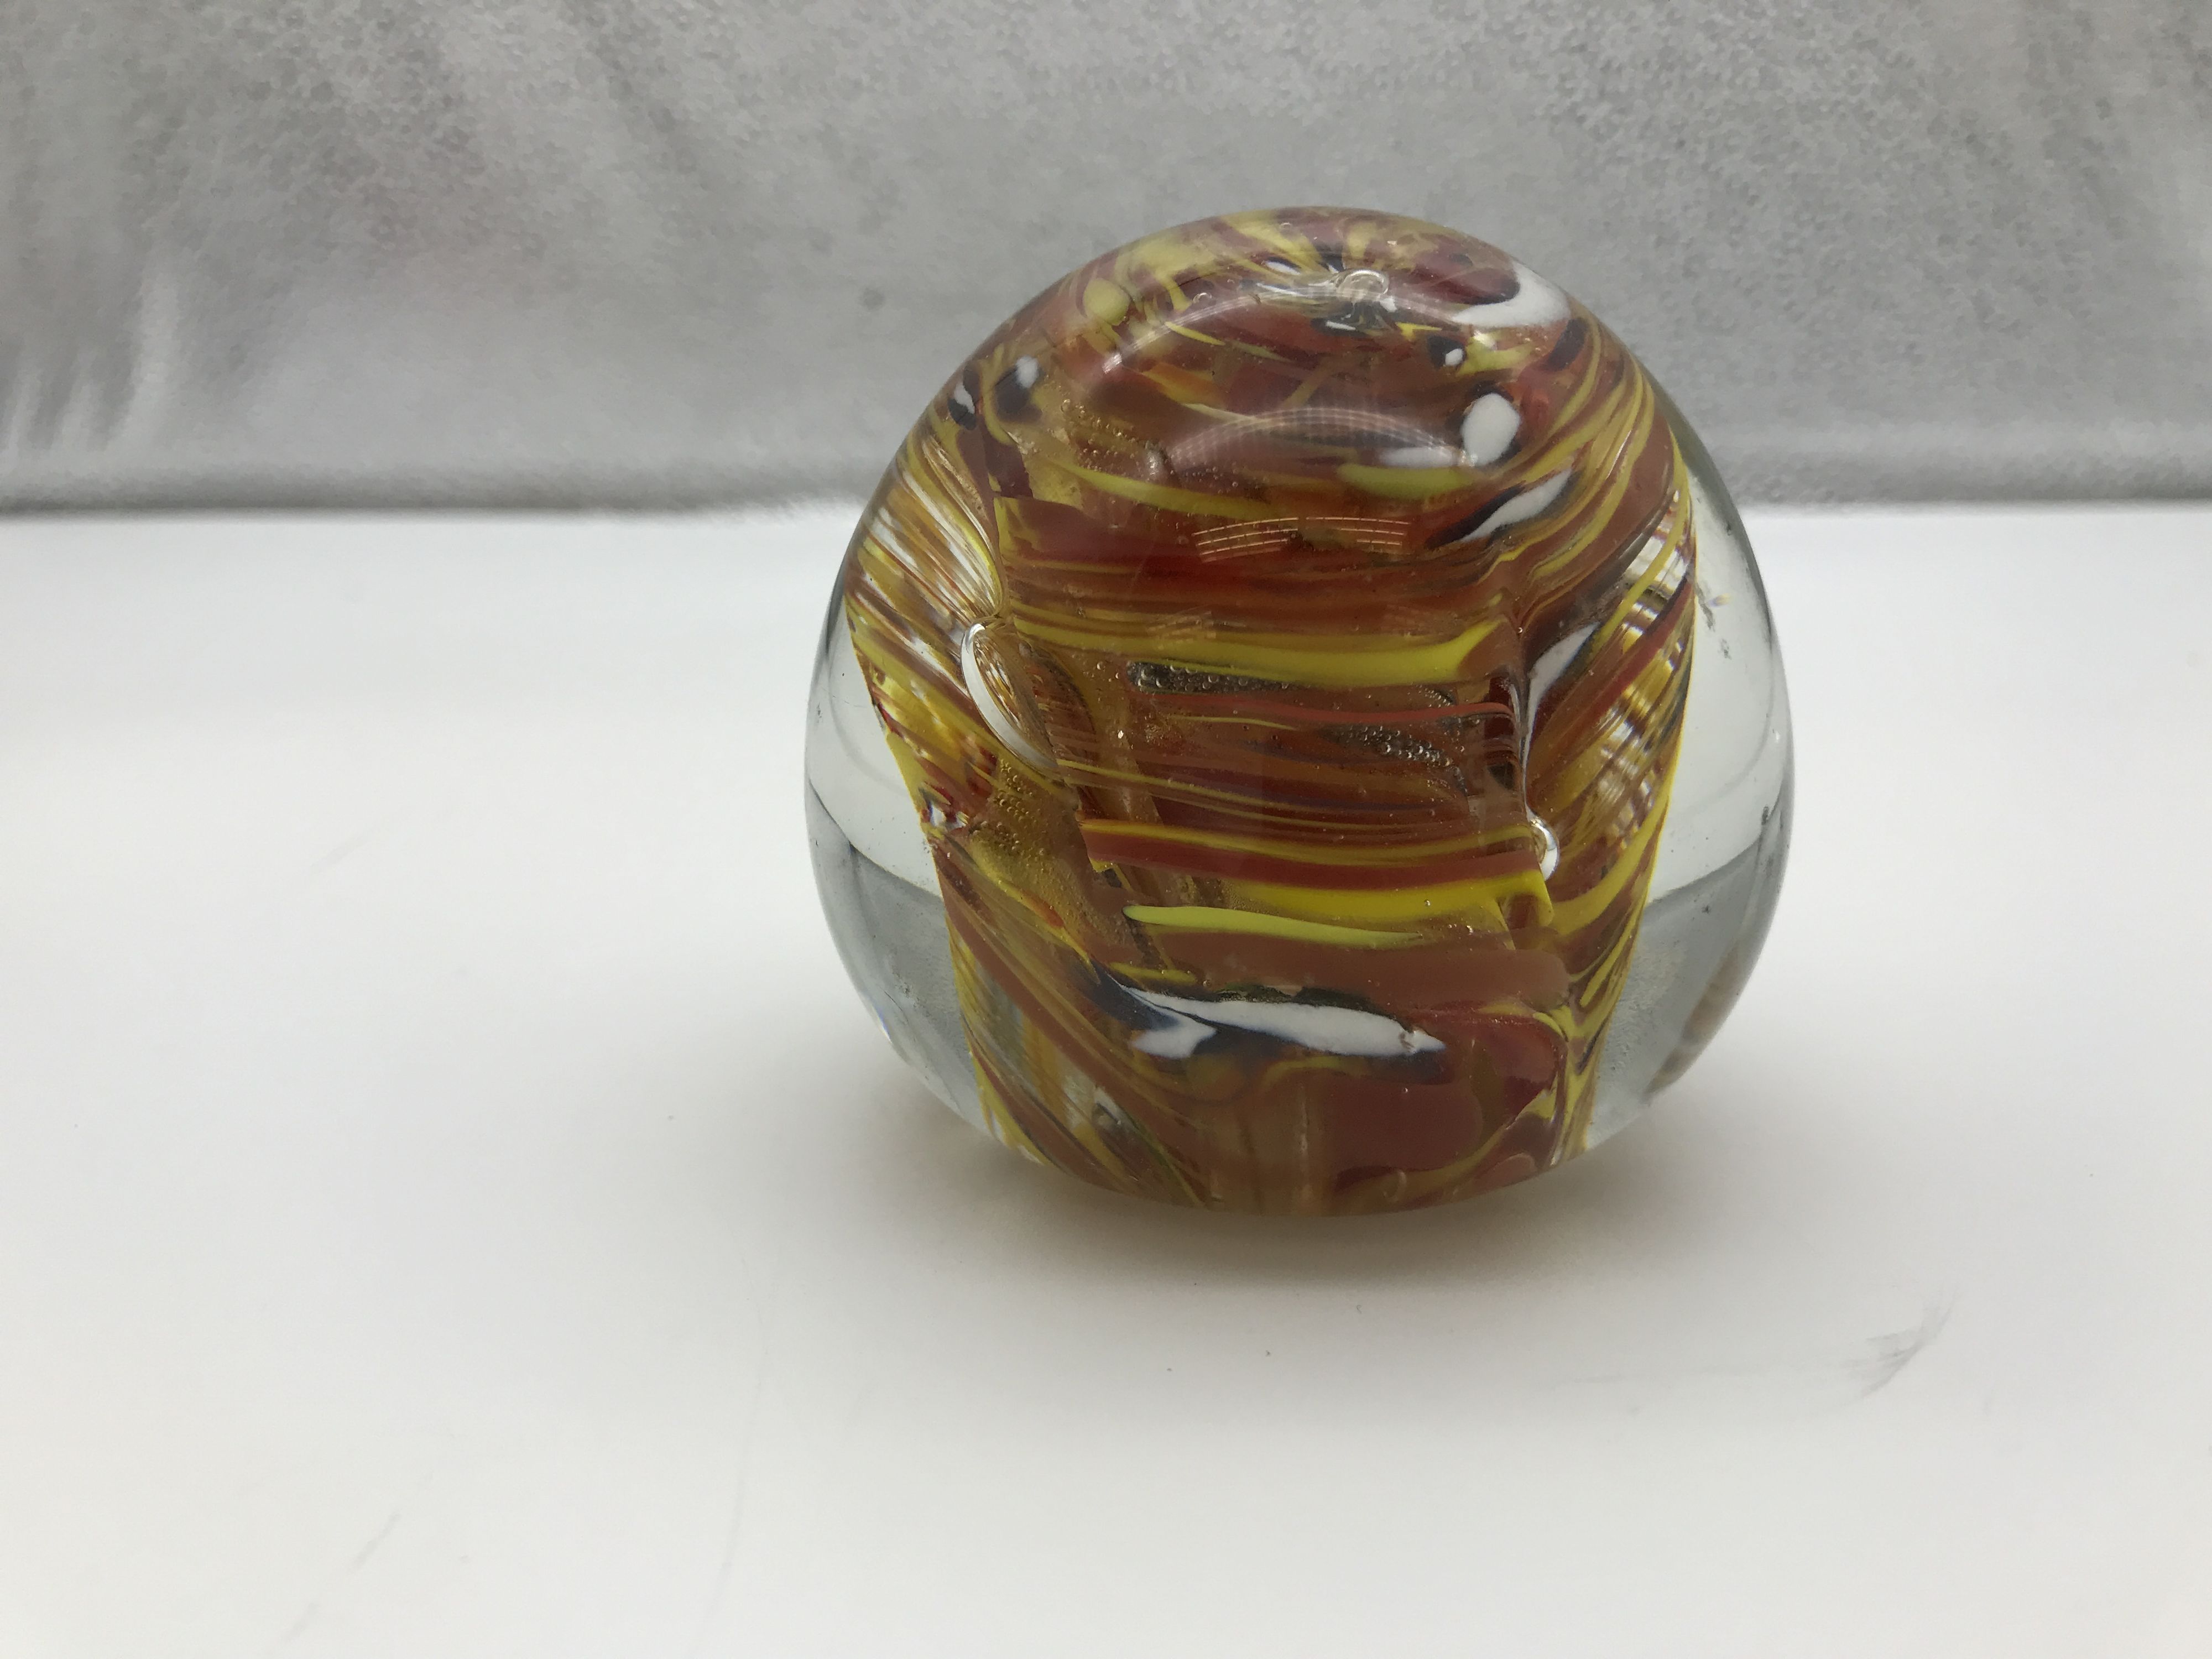 Orange, Yellow, And White Swirl Rounded Glass Desktop Paperweight